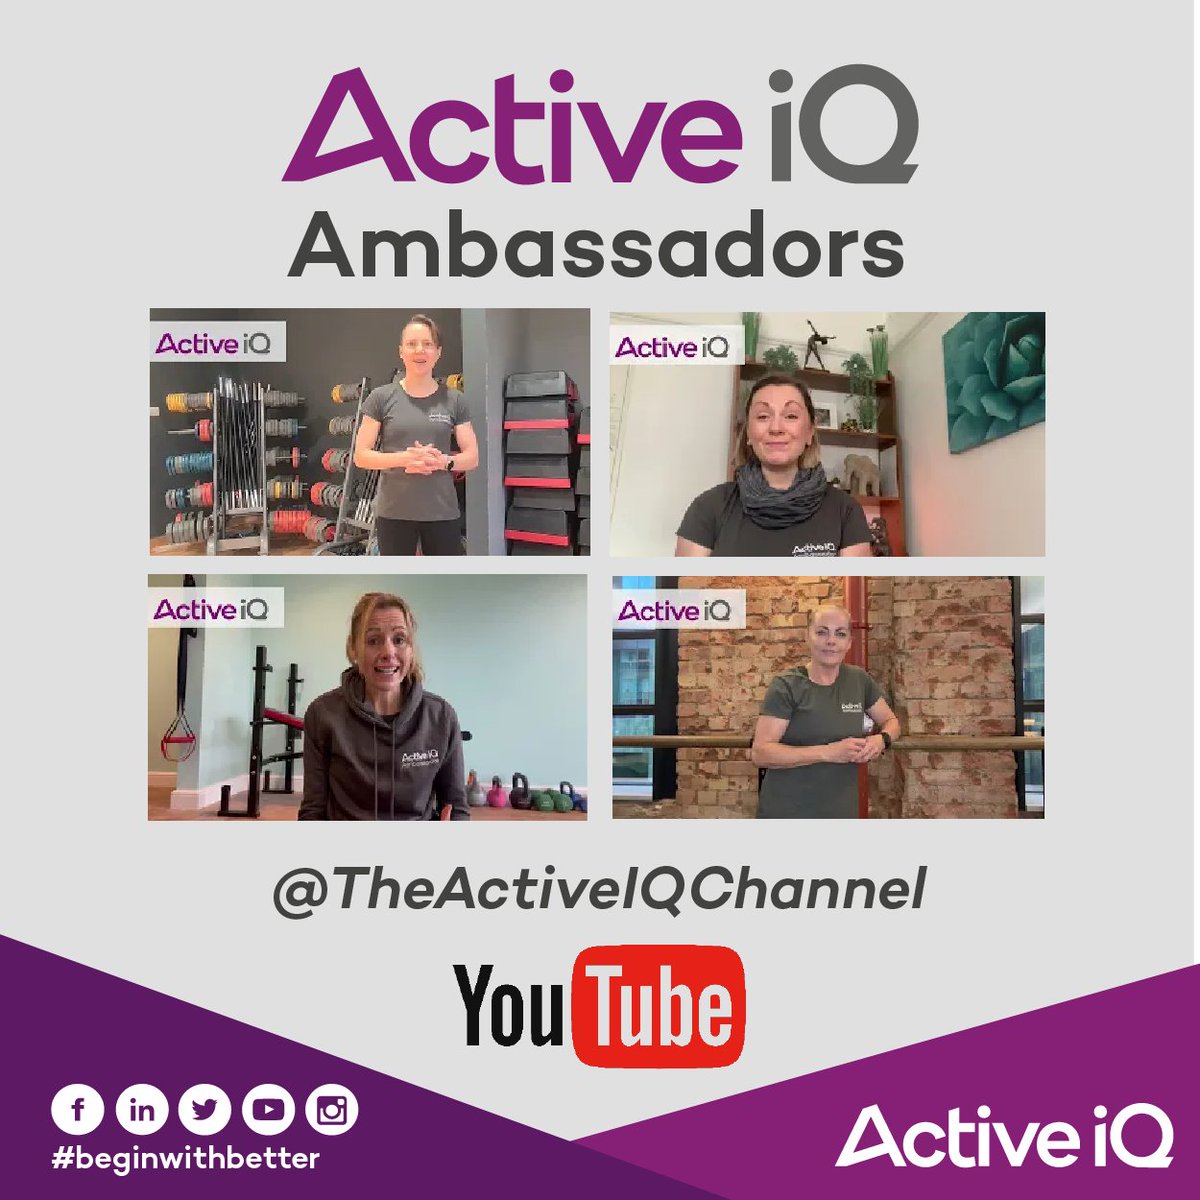 You can look back over all our Active IQ Ambassador videos here on @TheActiveIQChannel YouTube channel. youtube.com/playlist?list=… #Beginwithbetter #ActiveIQ #AIQAmbassadors